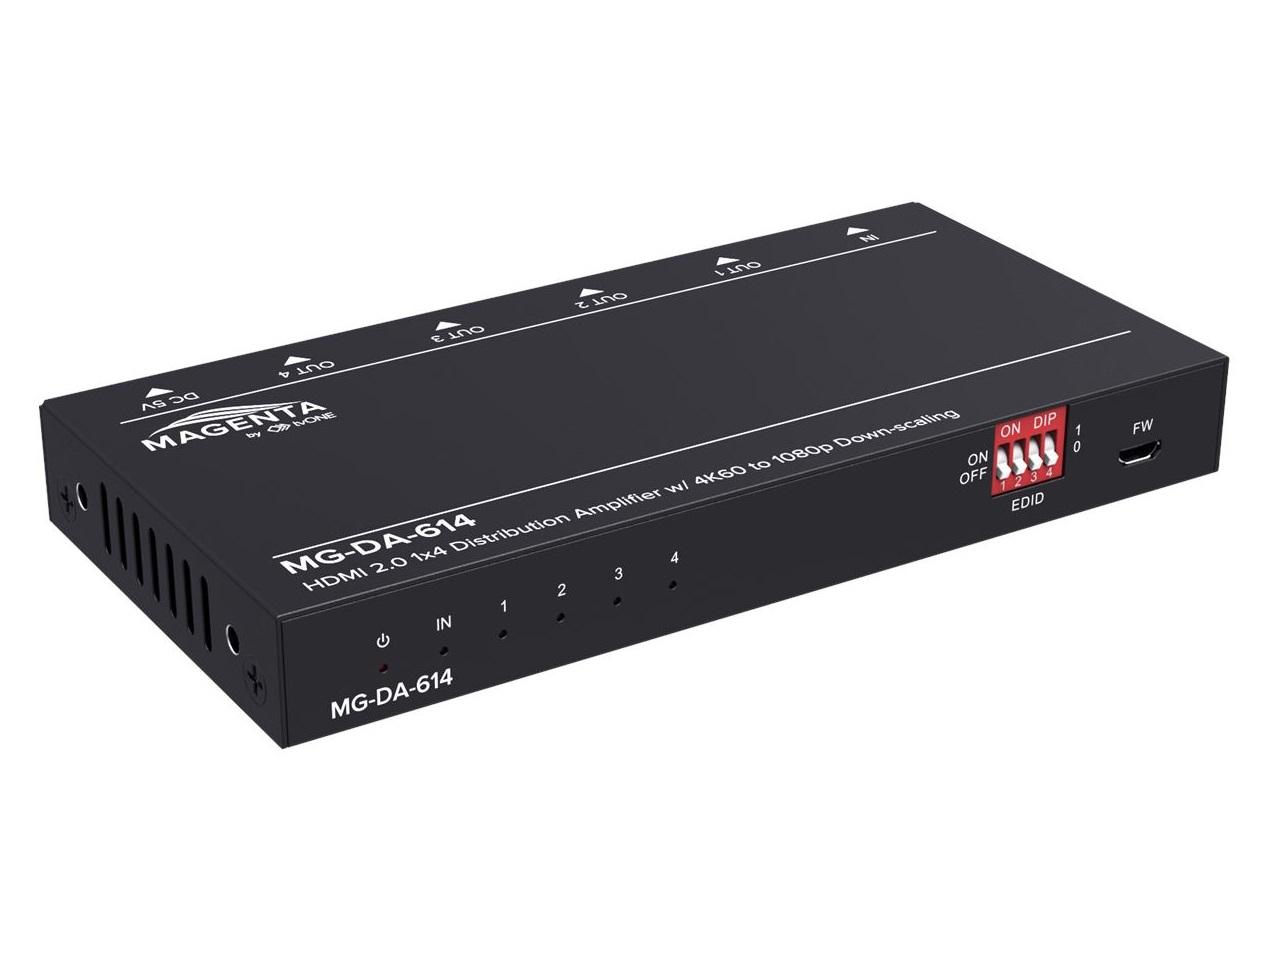 MG-DA-614 1x4 4K60 HDMI 2.0 Splitter with HDCP 2.2 and Down Scaling by Magenta Research